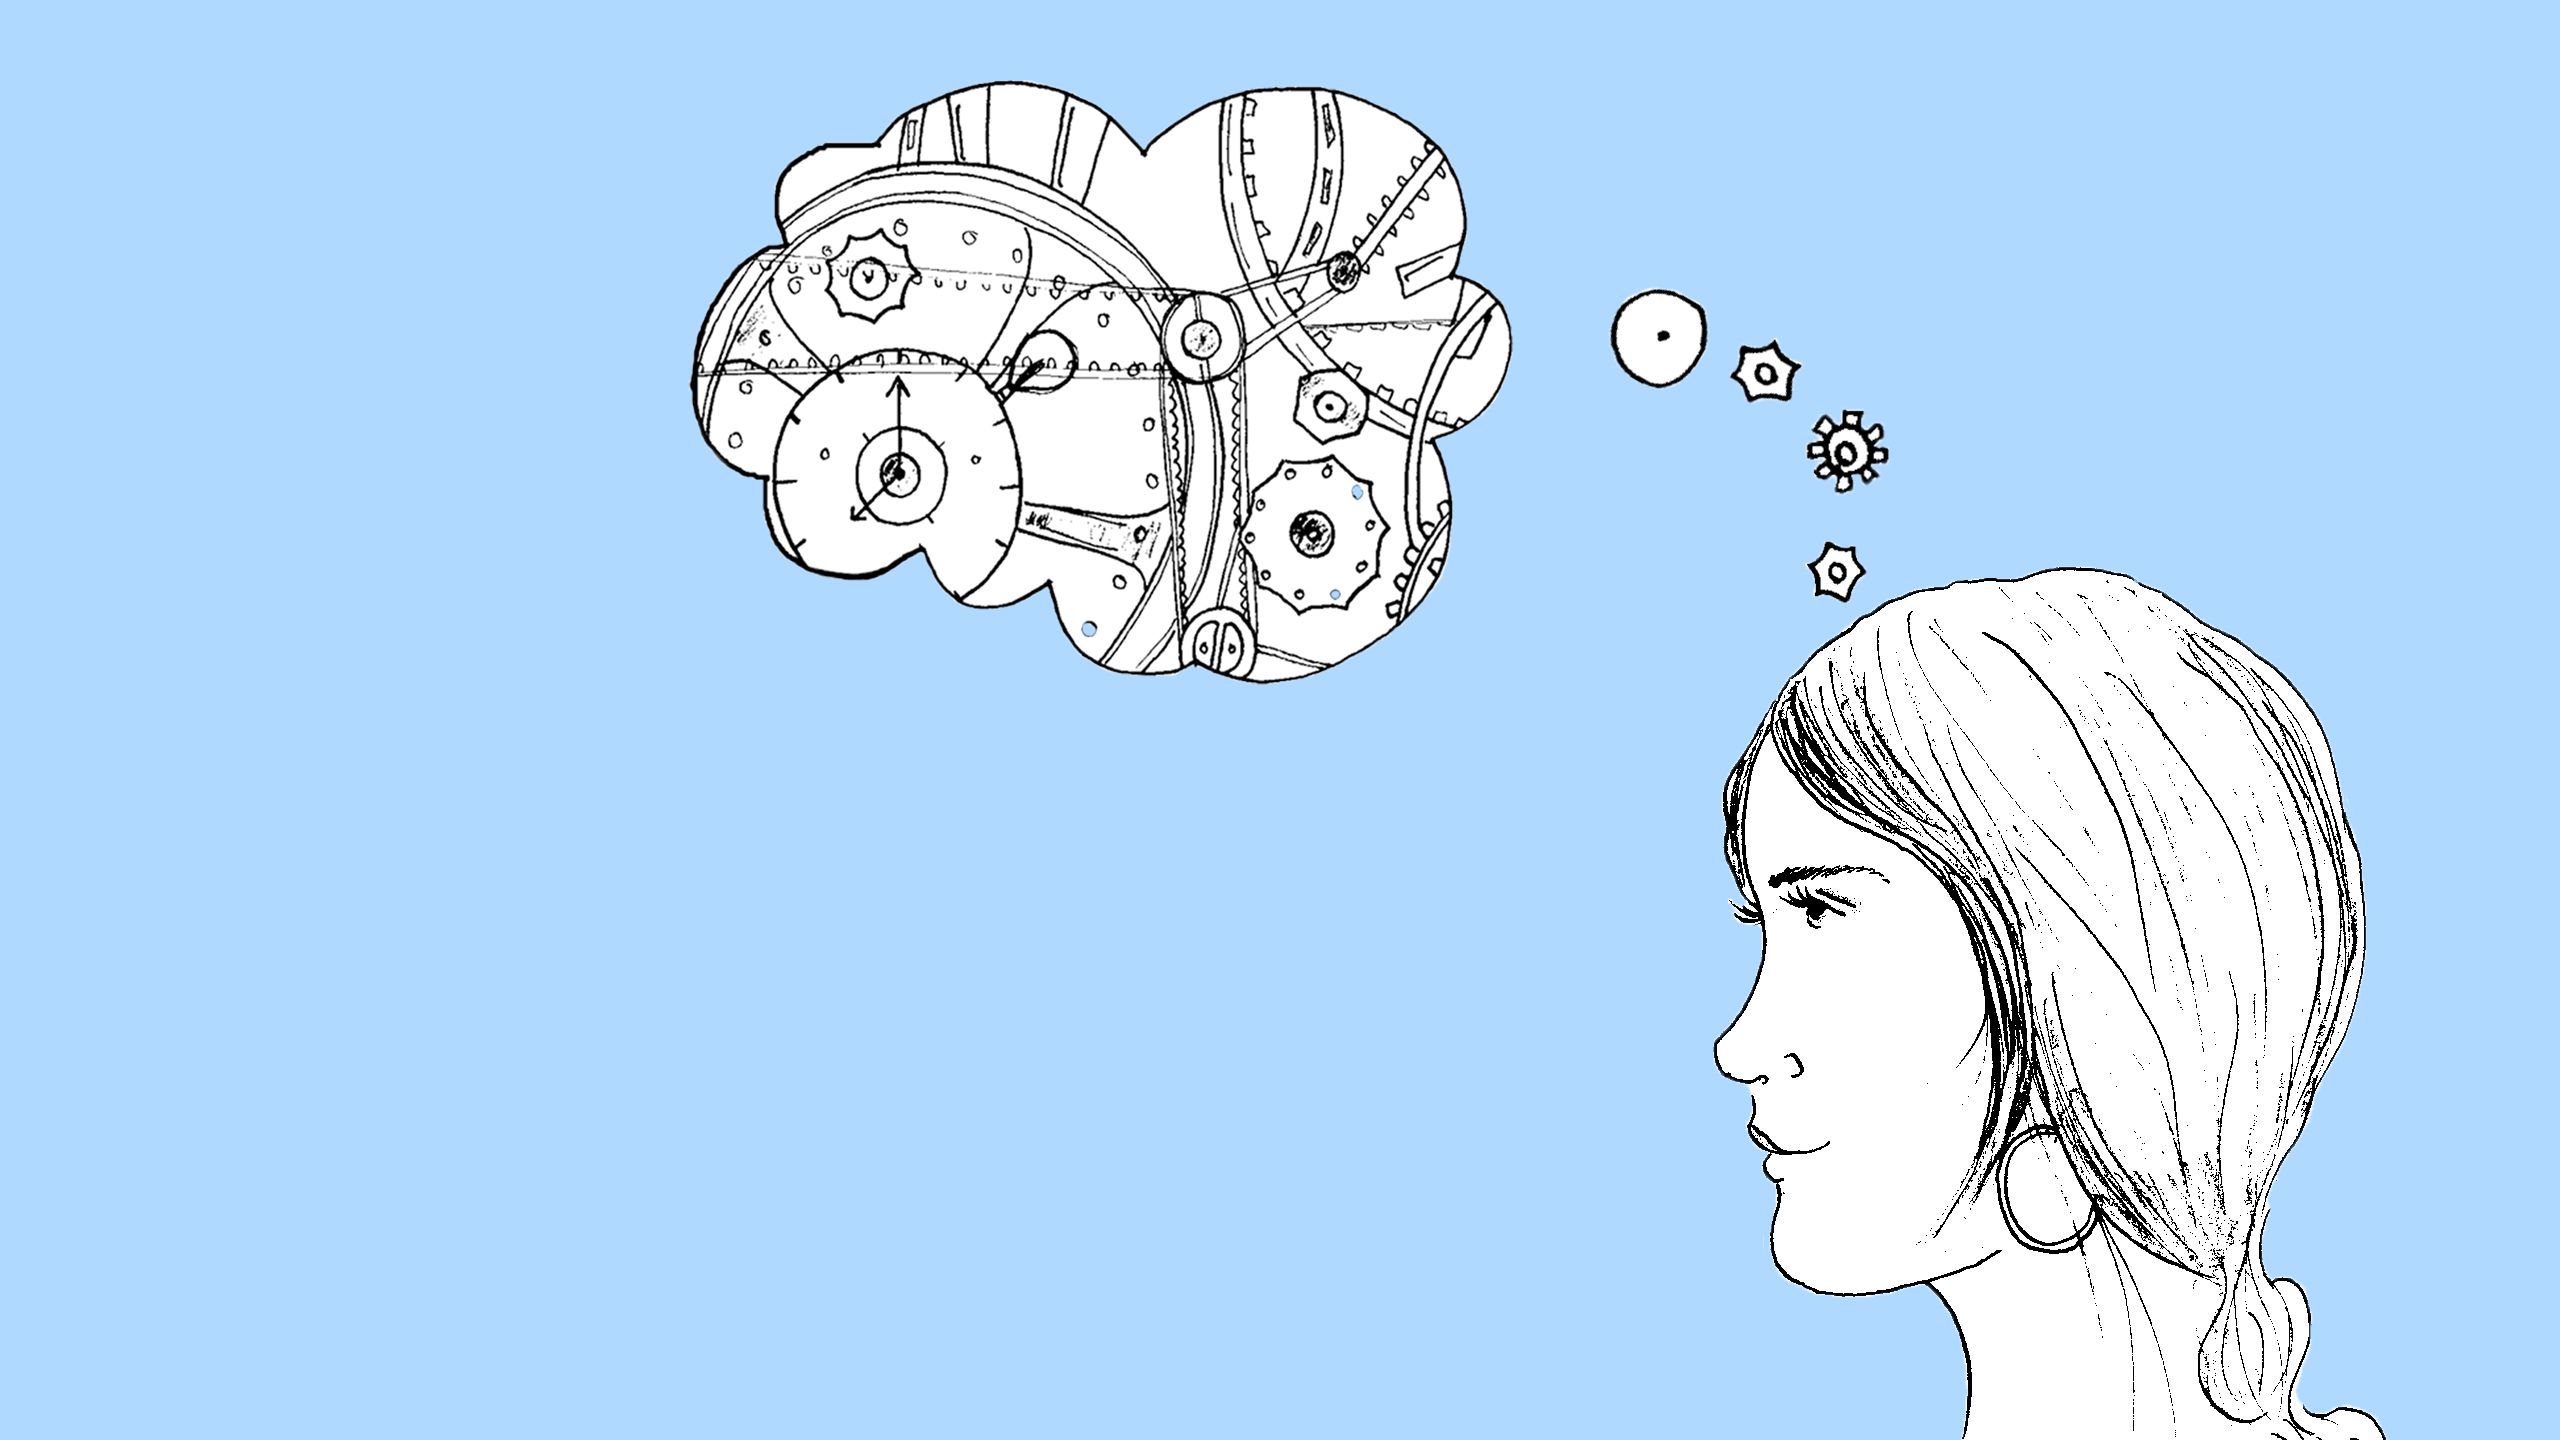 Illustration of student thinking with ideas in a cloud above her head.